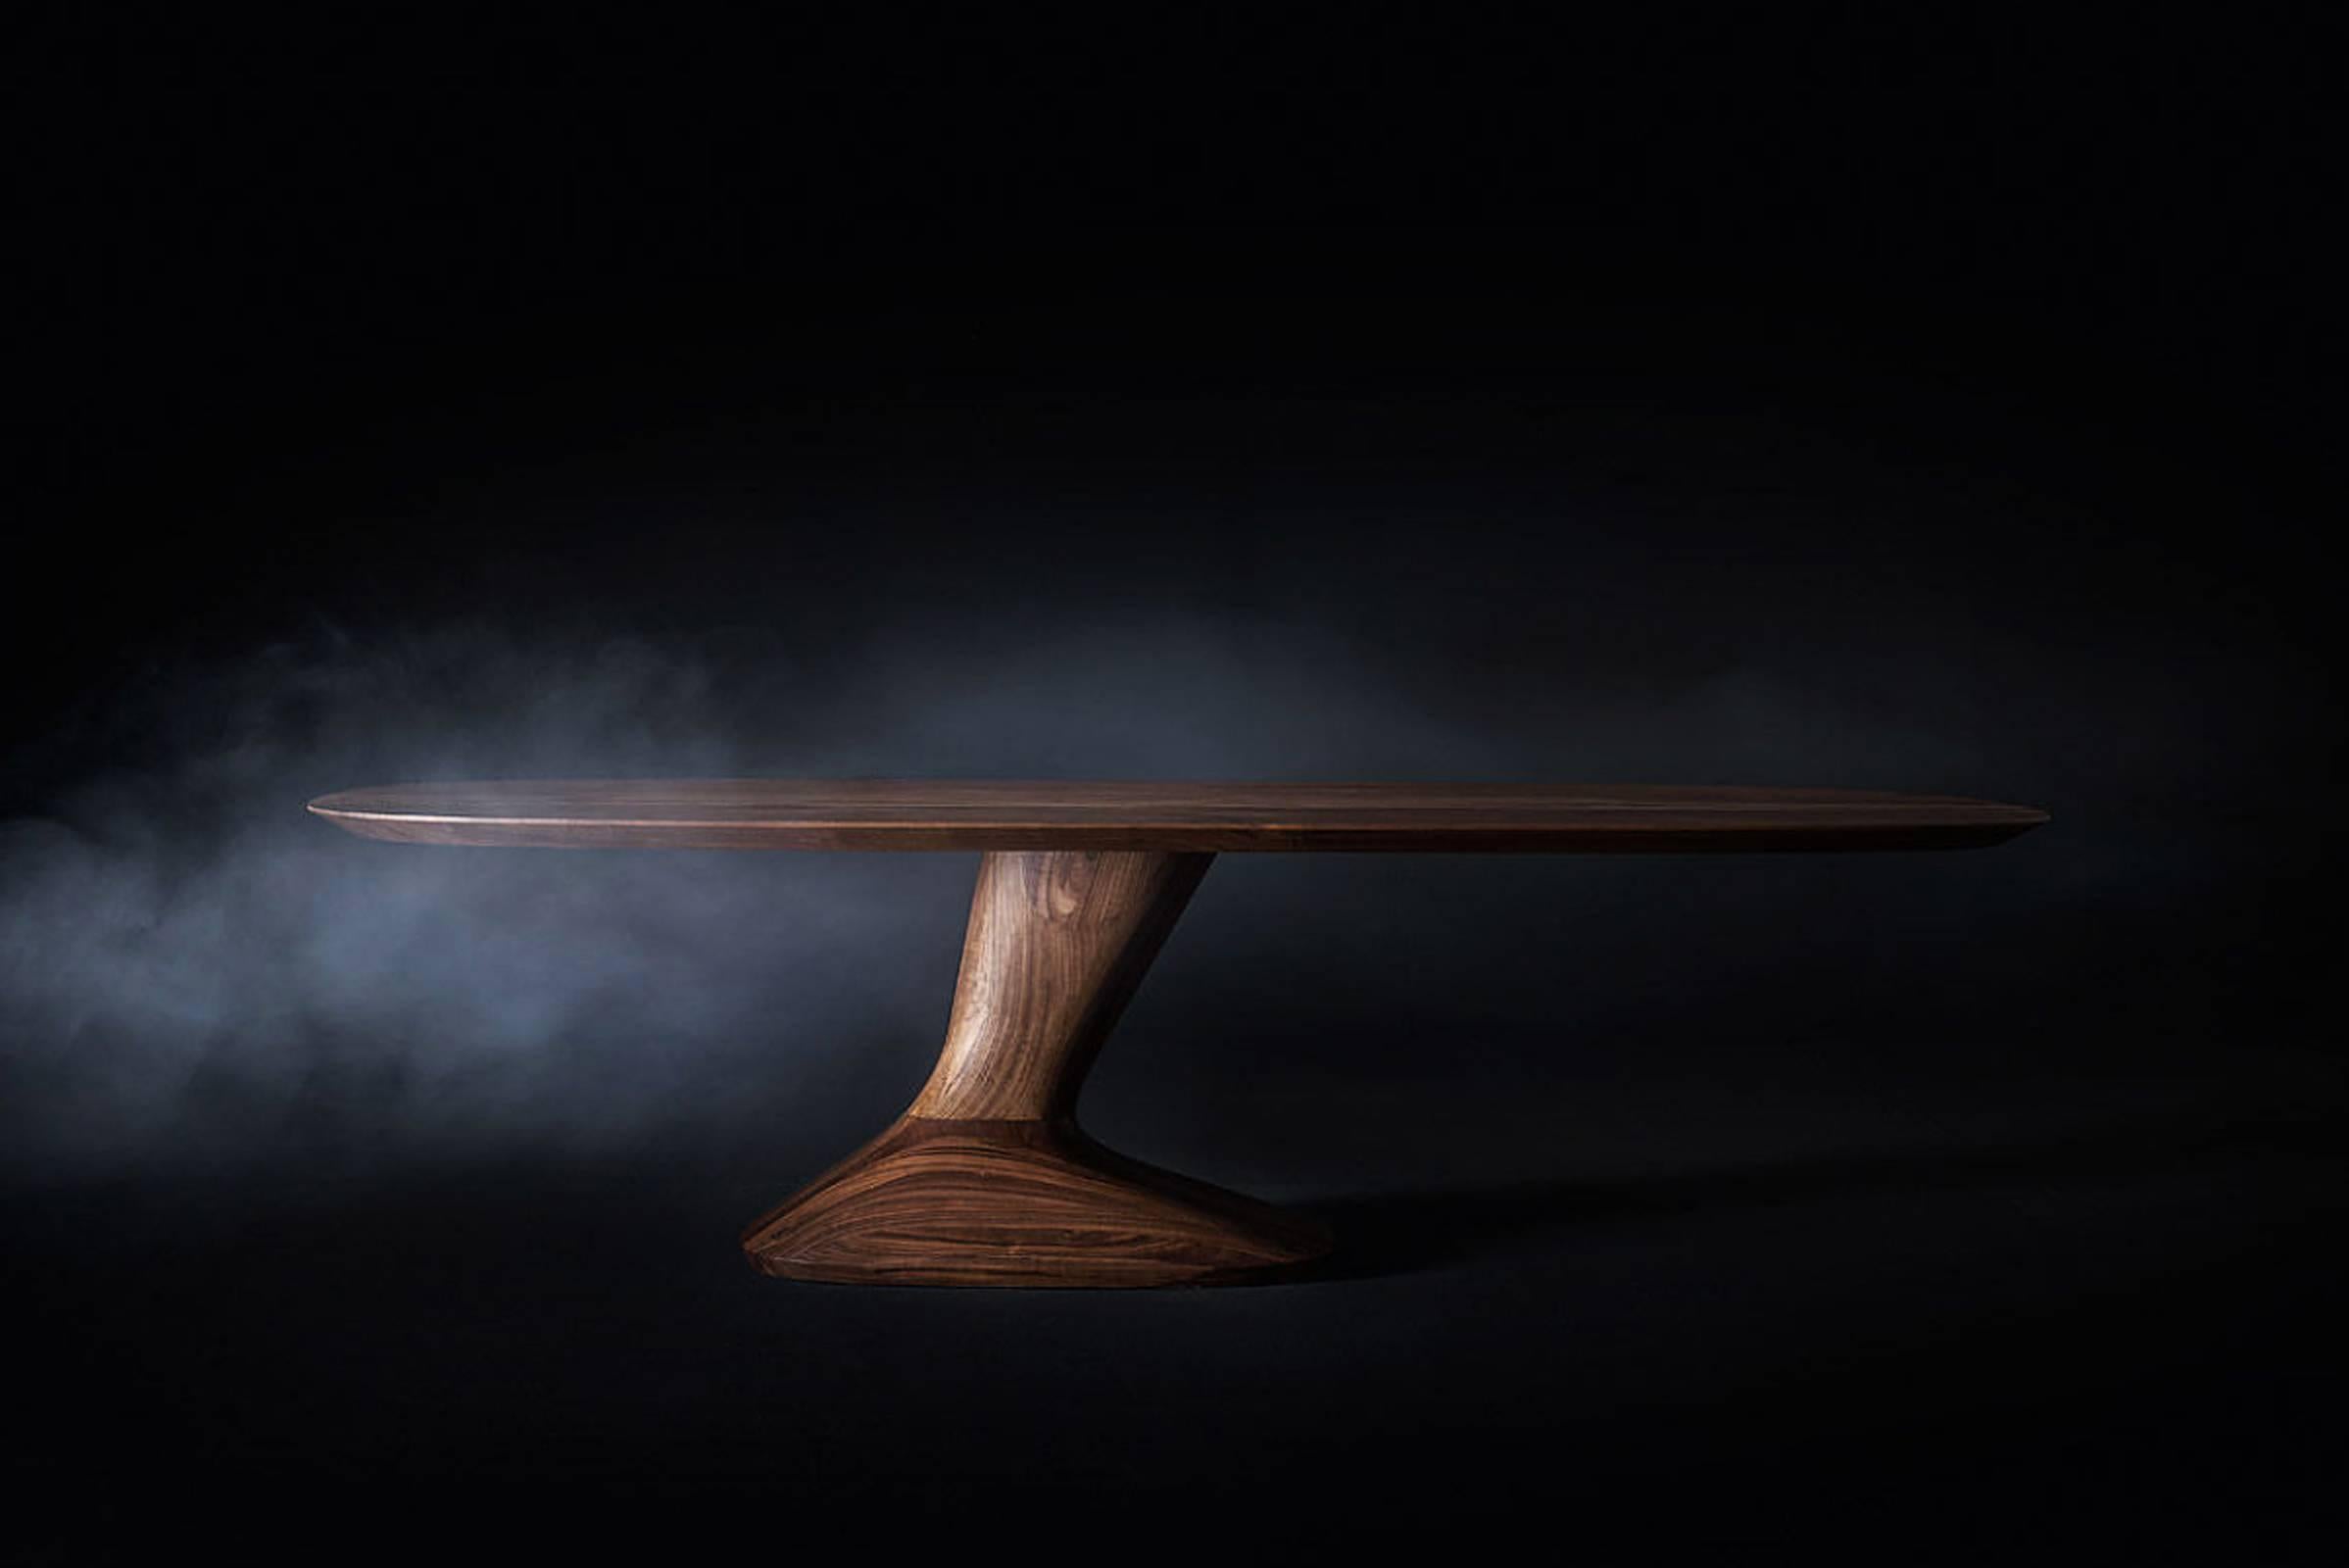 Dining table racing in solid walnut wood made of smoothed
edges and glued lists. With asymmetrical lateral base
Natural wax of vegetable origin with pine extracts finish.
Available in:
L 240 x D120 x H 75cm, price: 28900,00€
L 260 x D120 x H 75cm,